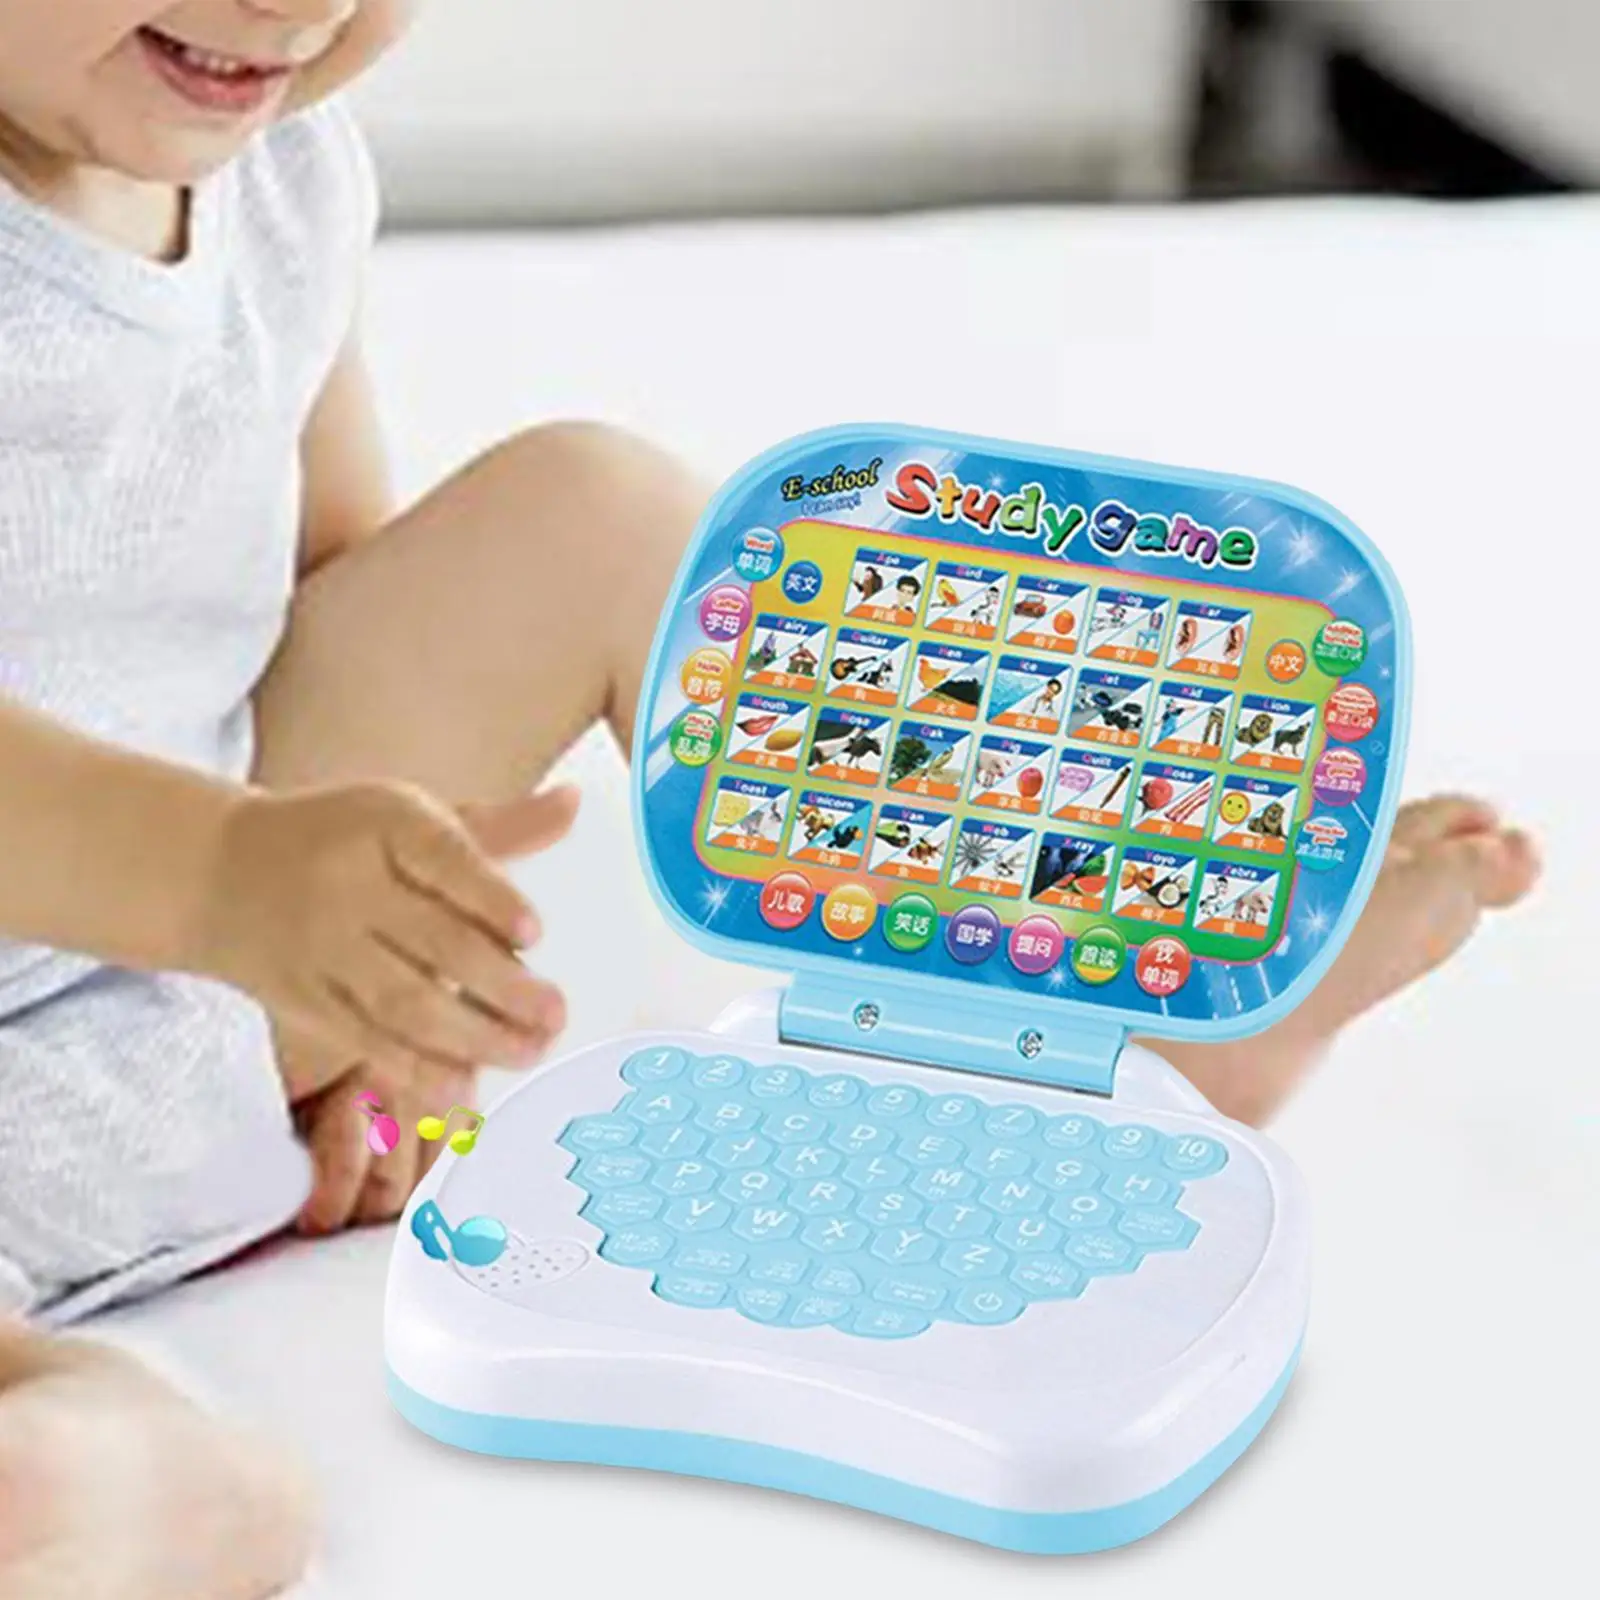 Multifunction Learning Machine Early Education English Early Education Toy Activities Kids Laptop Toy for Toddler Kids